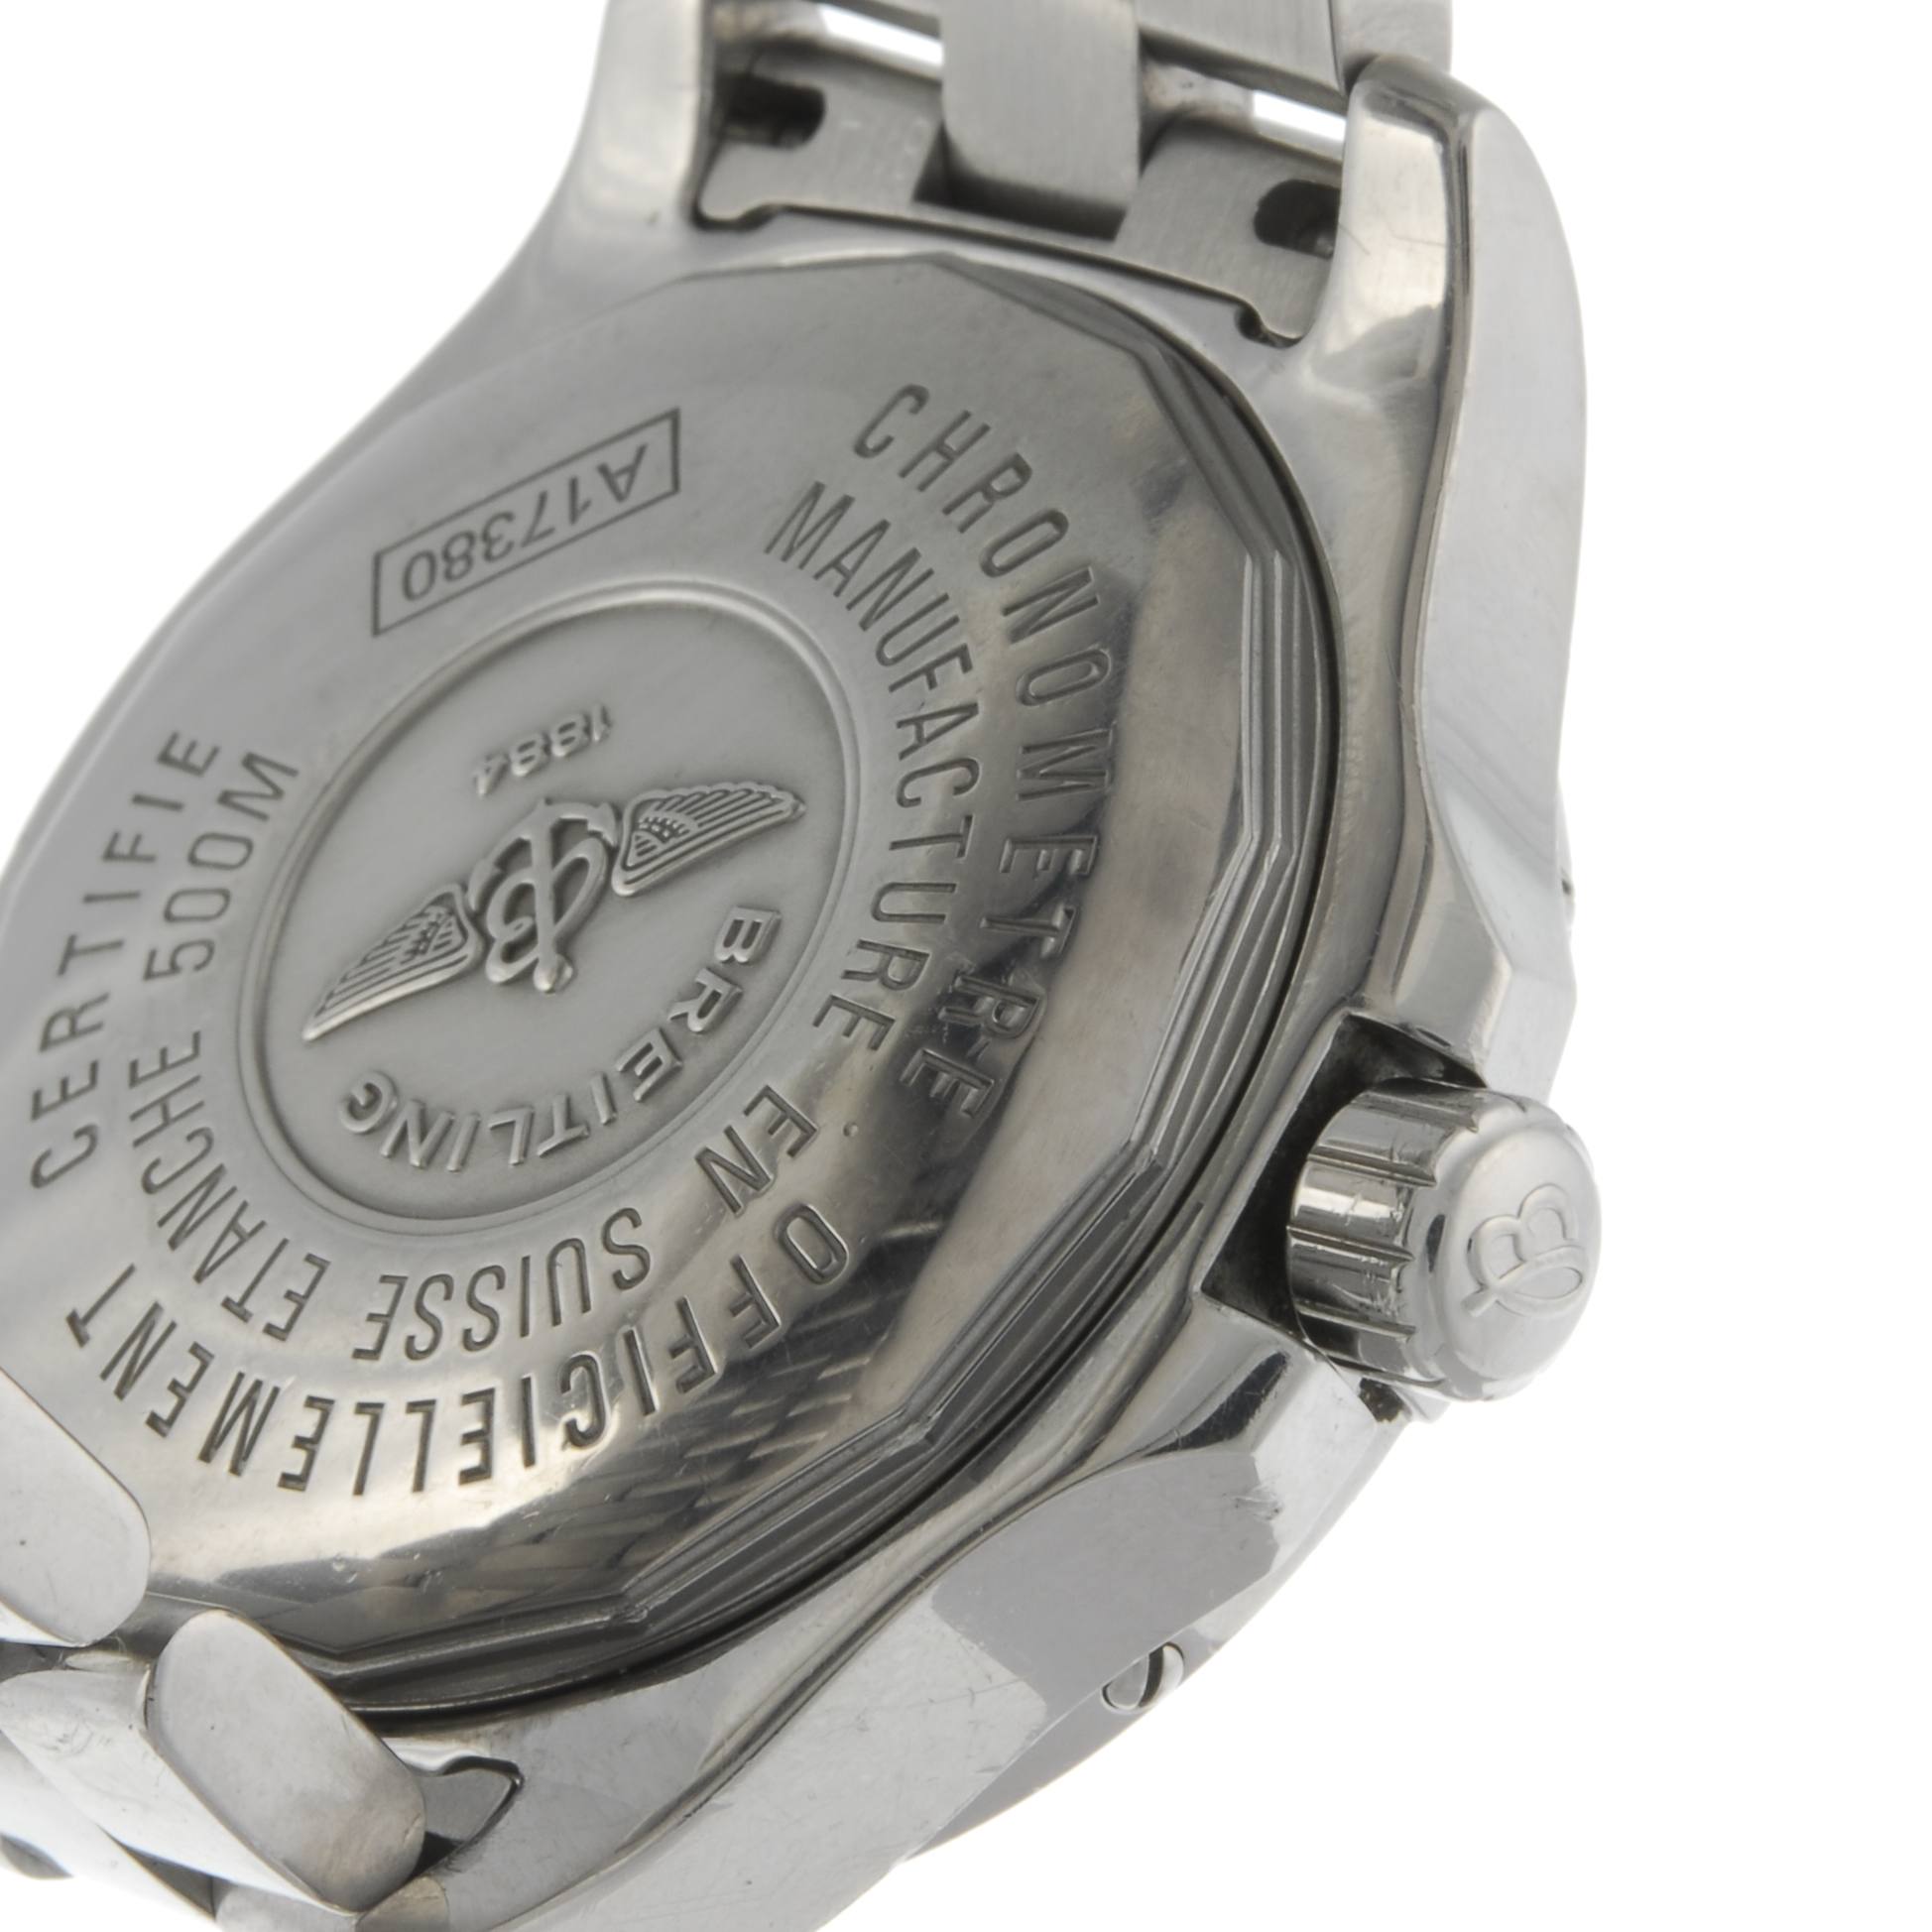 BREITLING - a gentleman's Colt bracelet watch. Stainless steel case with calibrated bezel. Reference - Image 3 of 4